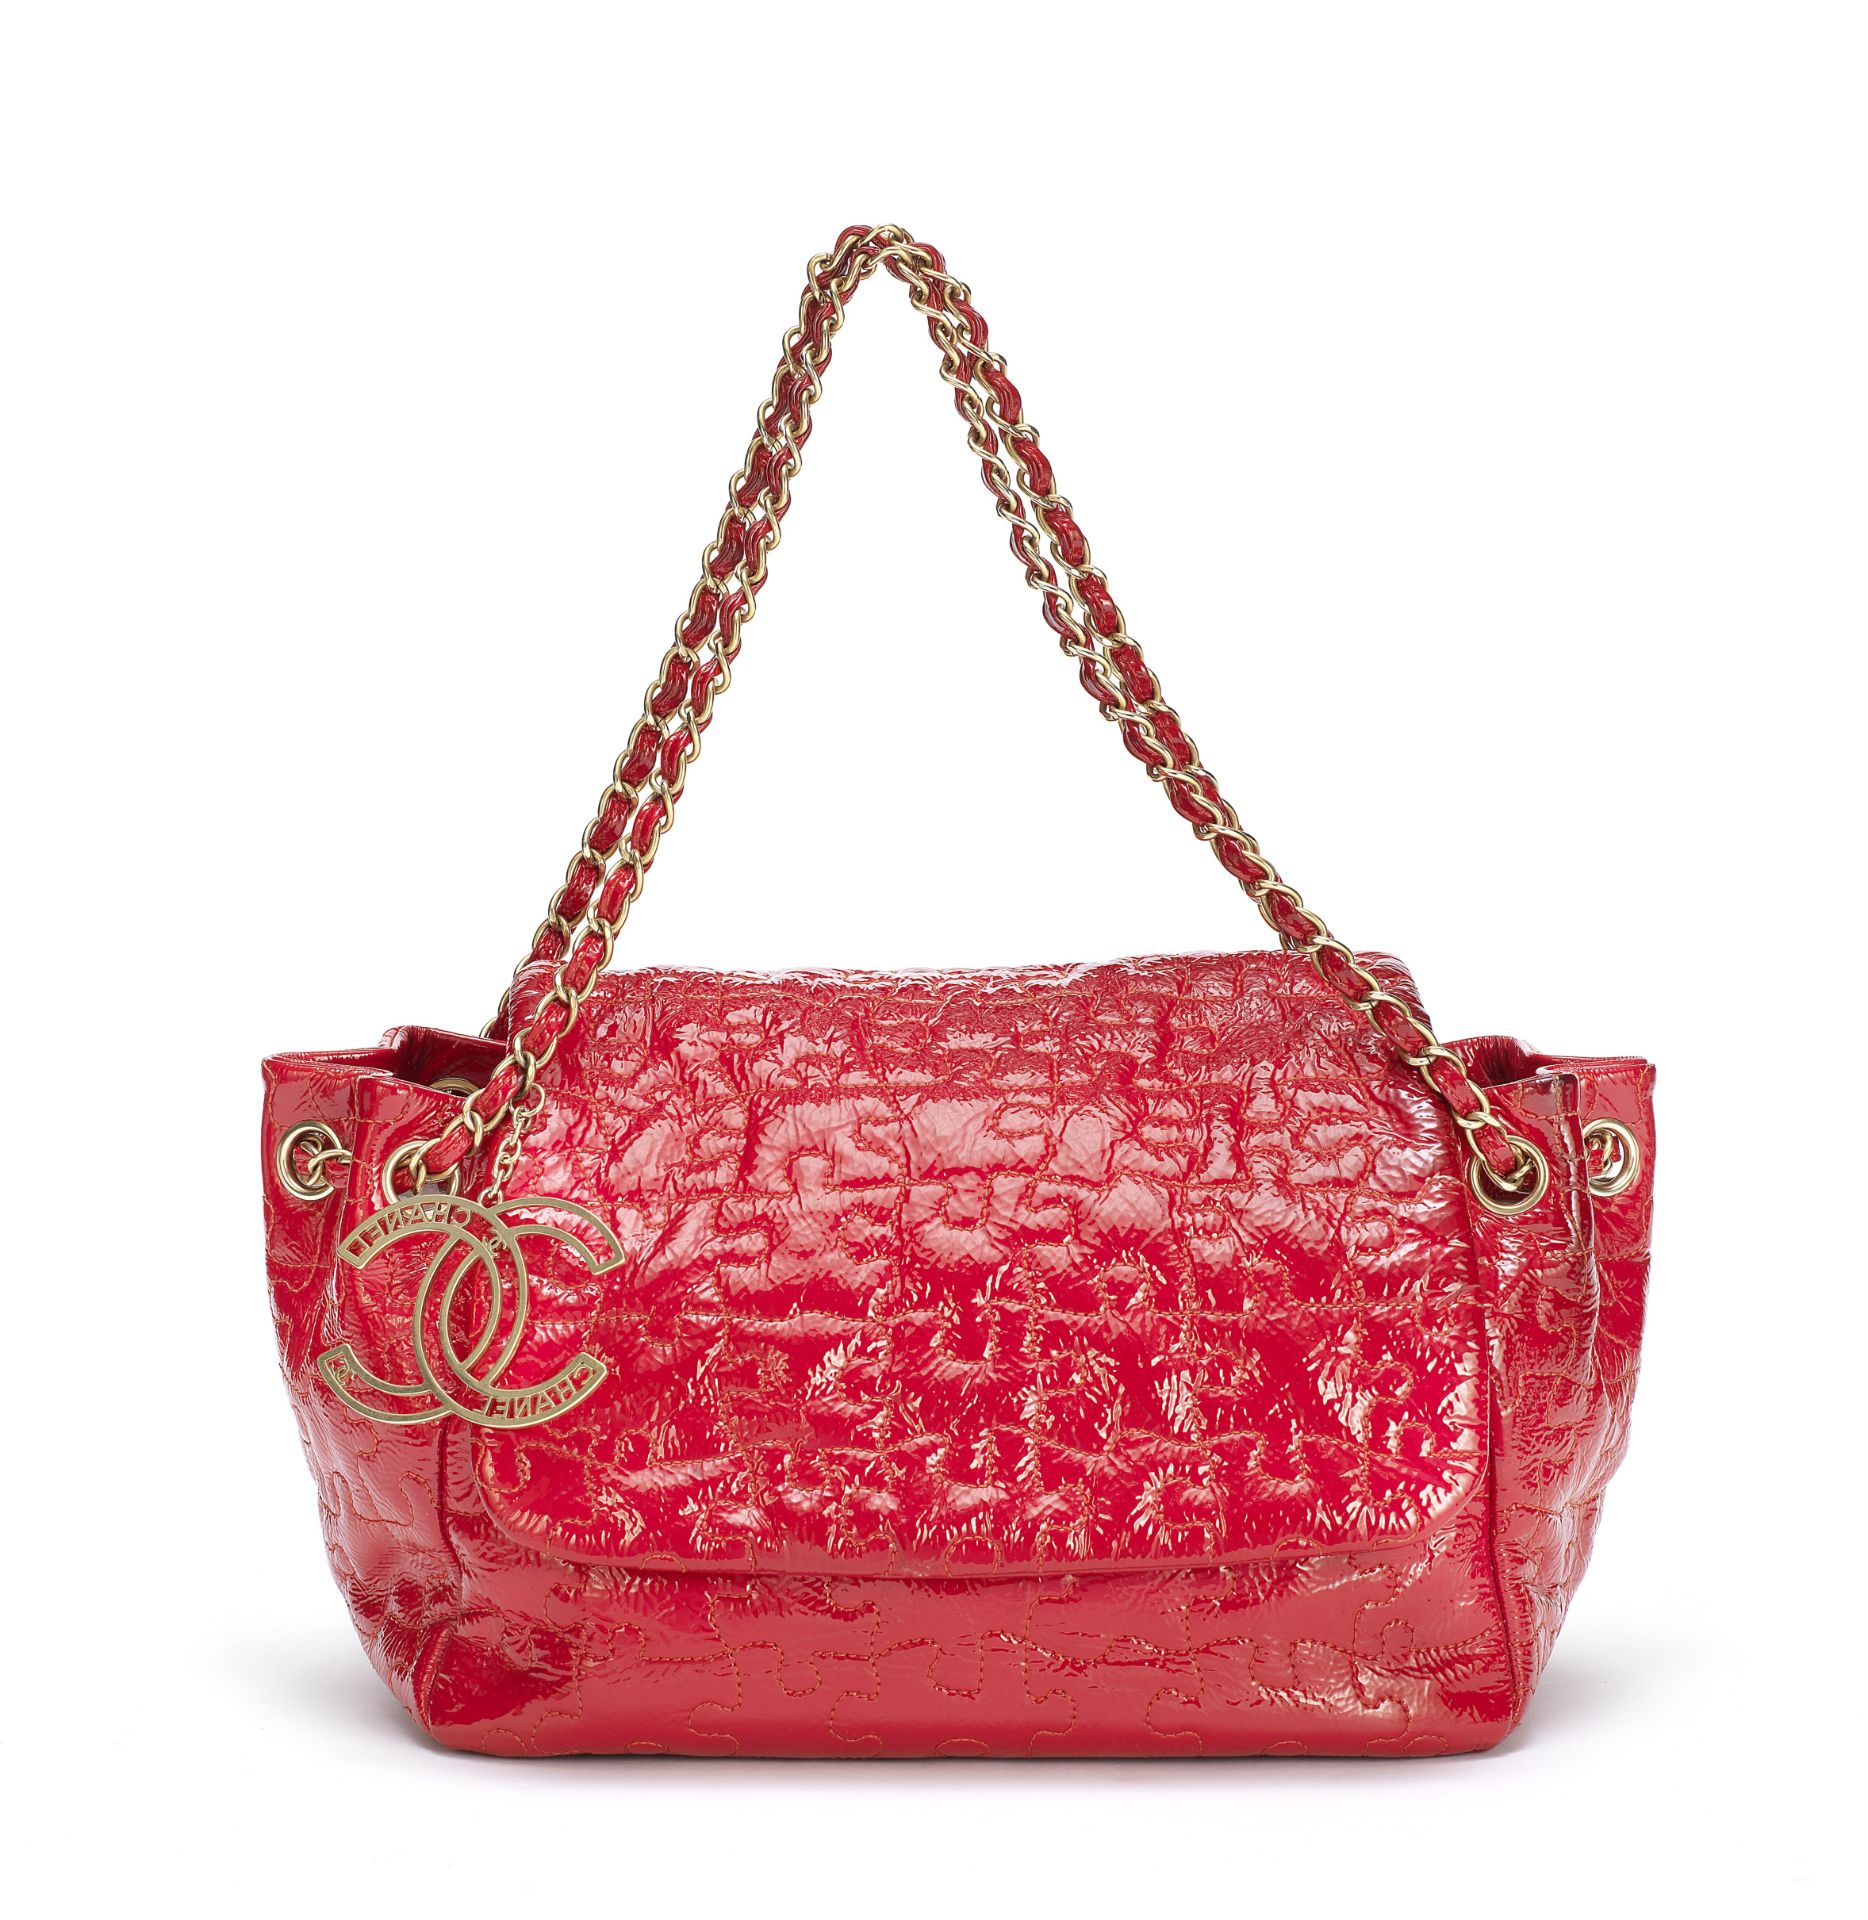 Red Patent Puzzle Flap Bag, Chanel, c. 2008-09, (Includes serial sticker)